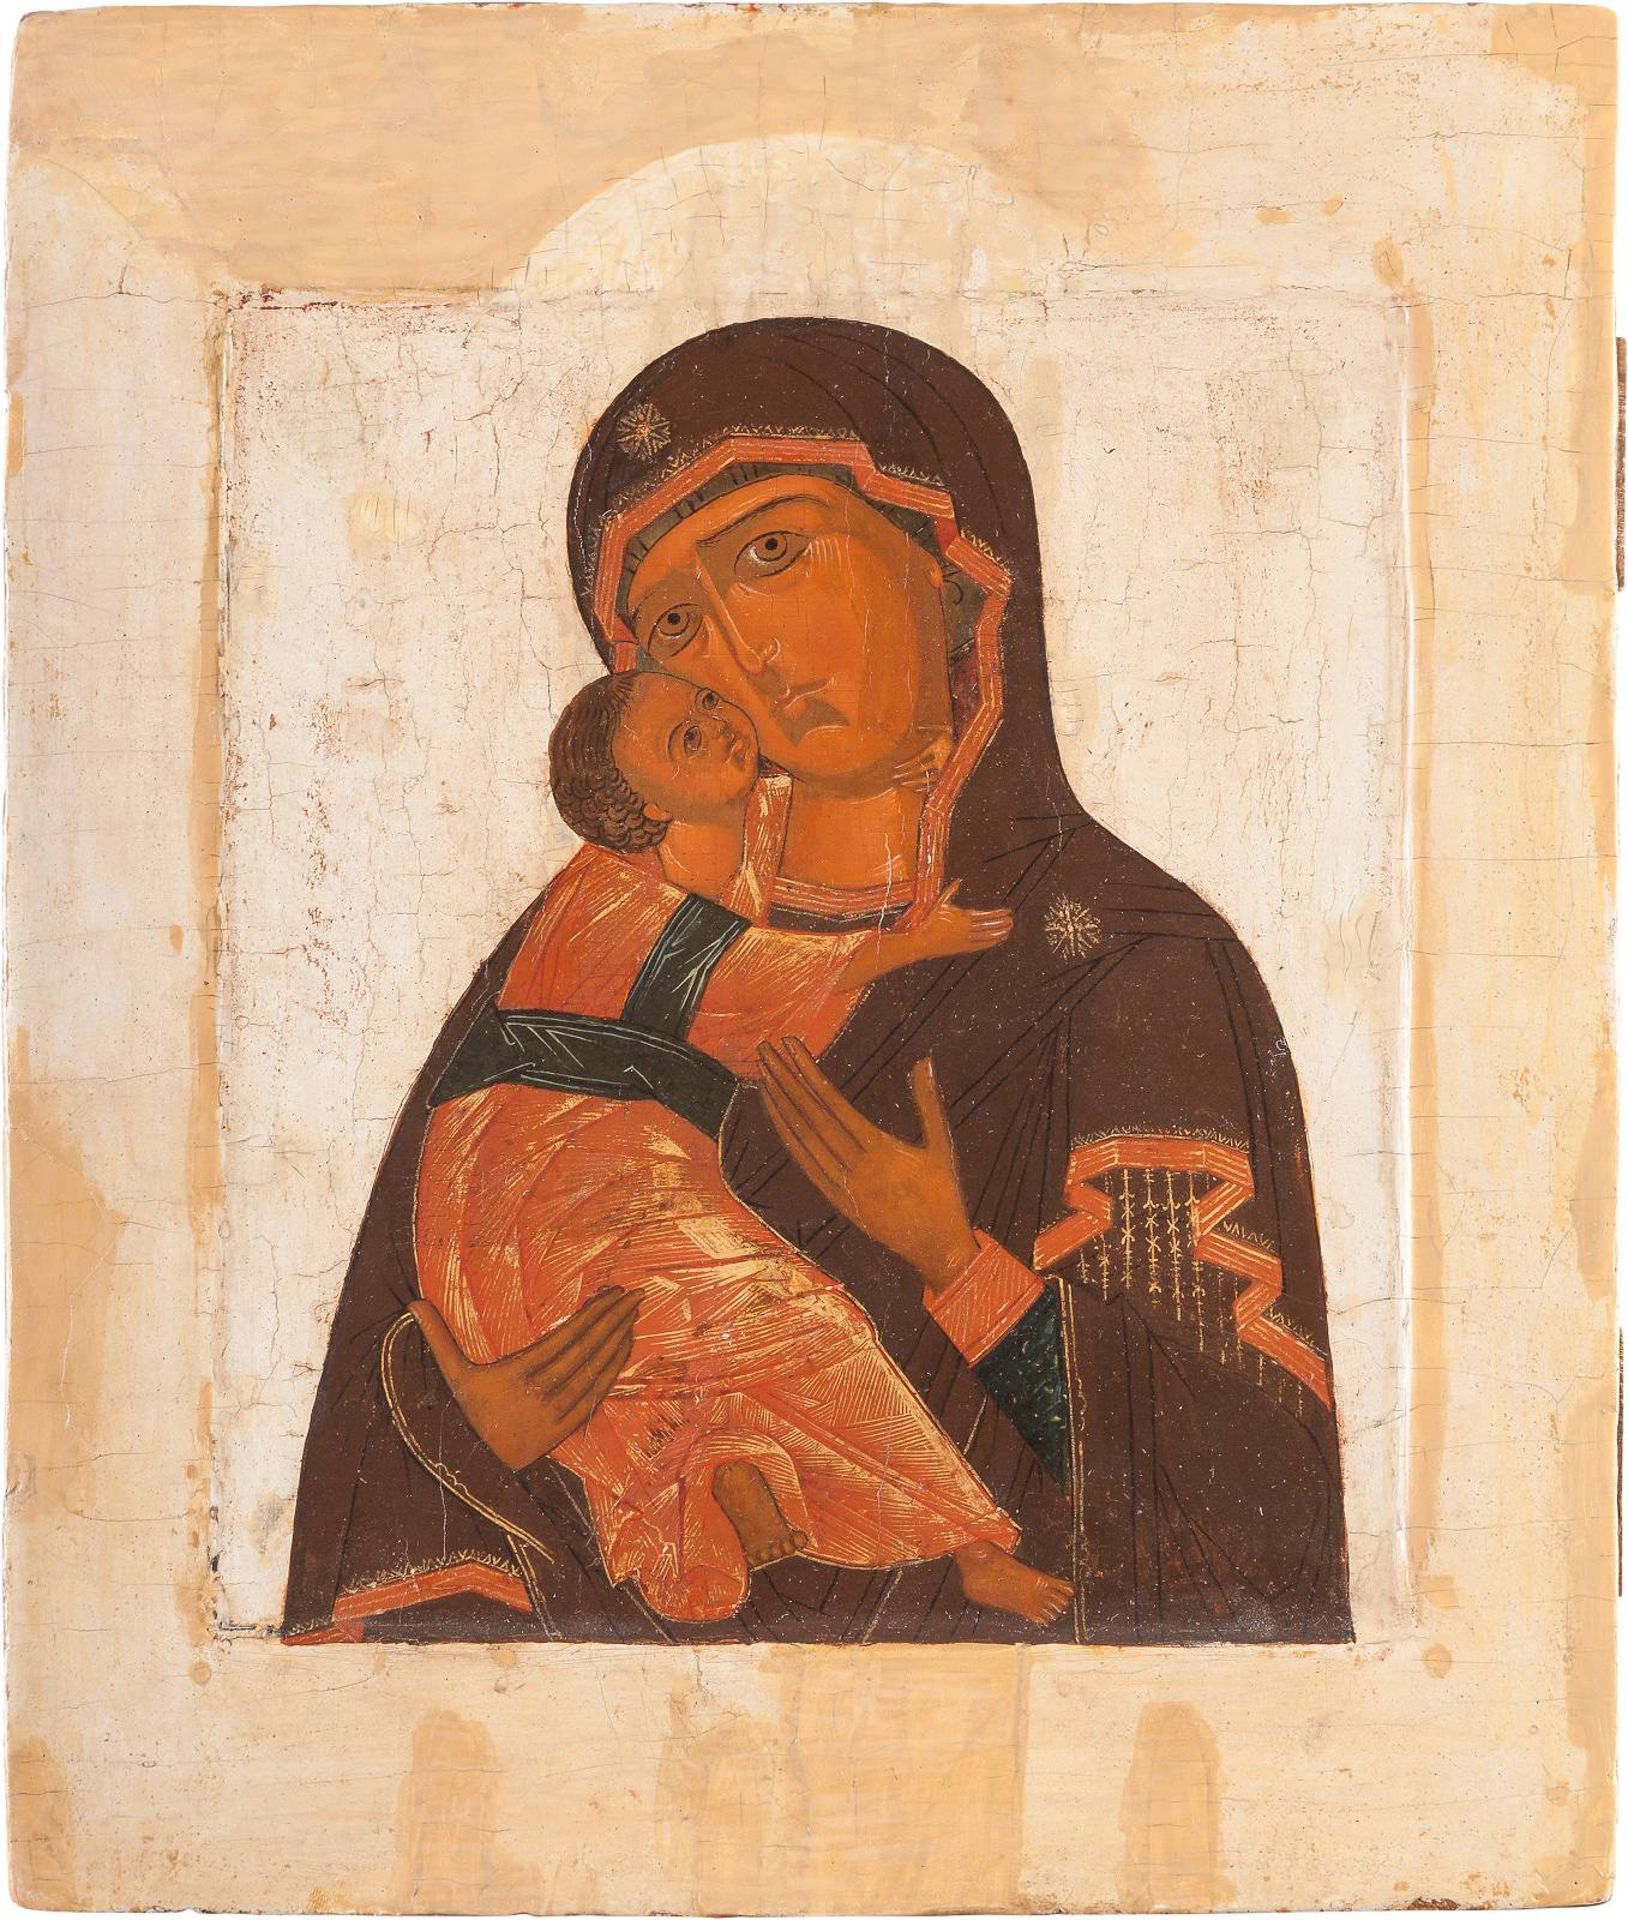 AN ICON SHOWIING THE VLADIMIRSKAYA MOTHER OF GODRussian, 17th century Tempera on wood panel with